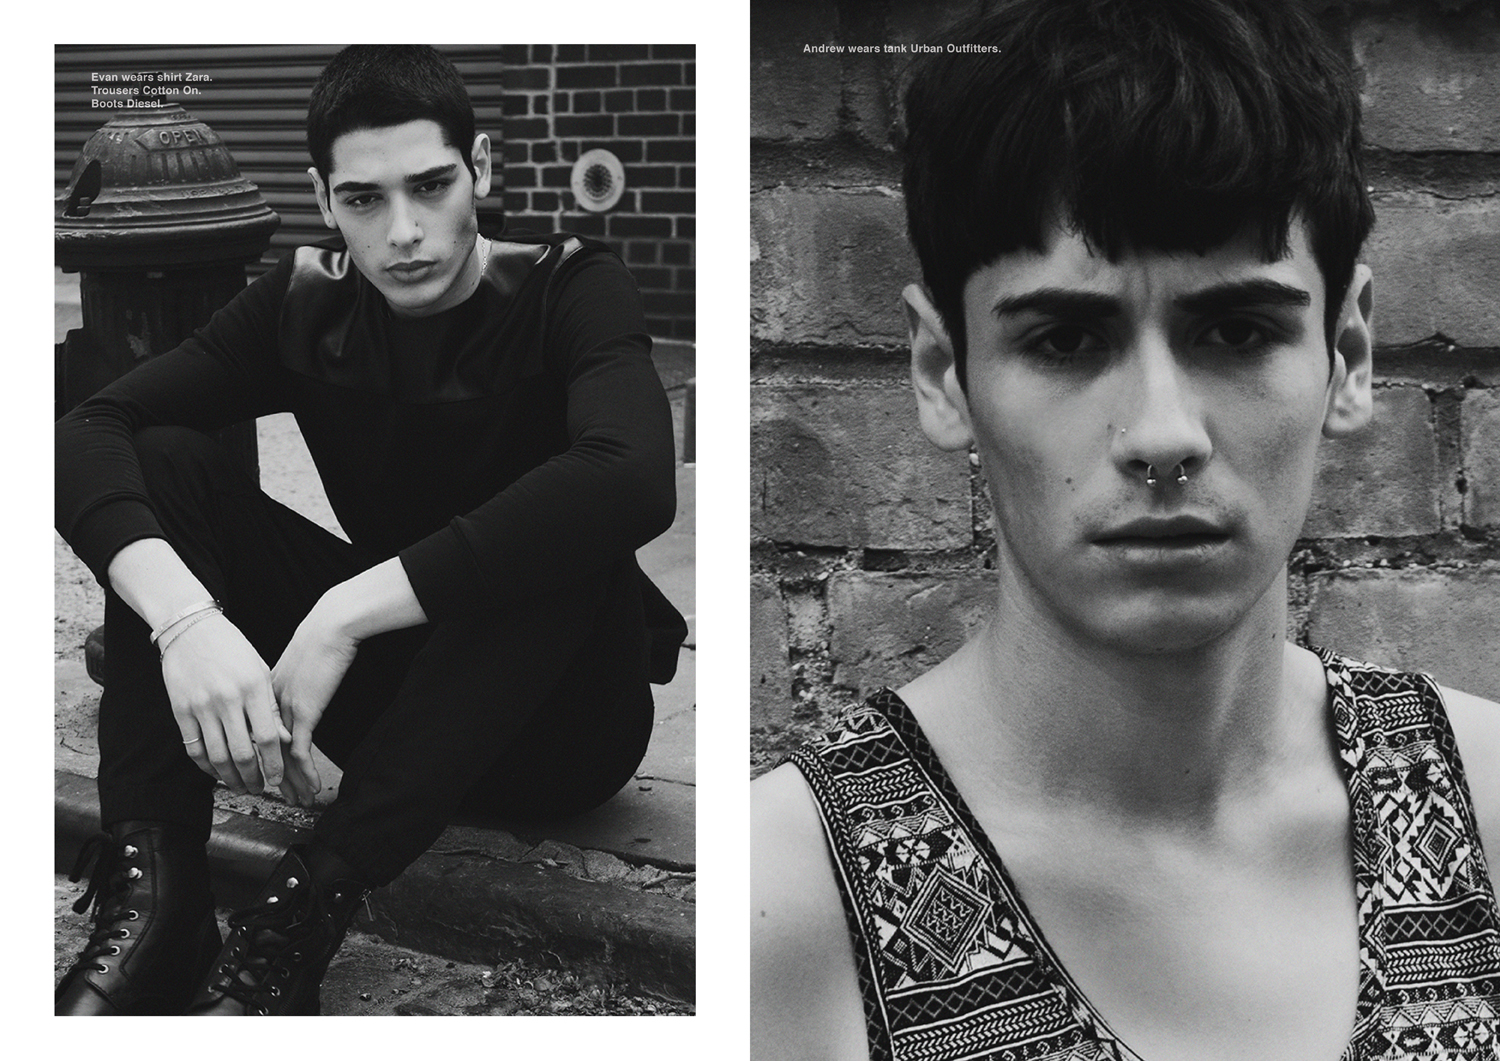 Left page, Evan wears shirt Zara. Trousers Cotton On. Boots Diesel. Right page, Andrew wears tank Urban Outfitters.